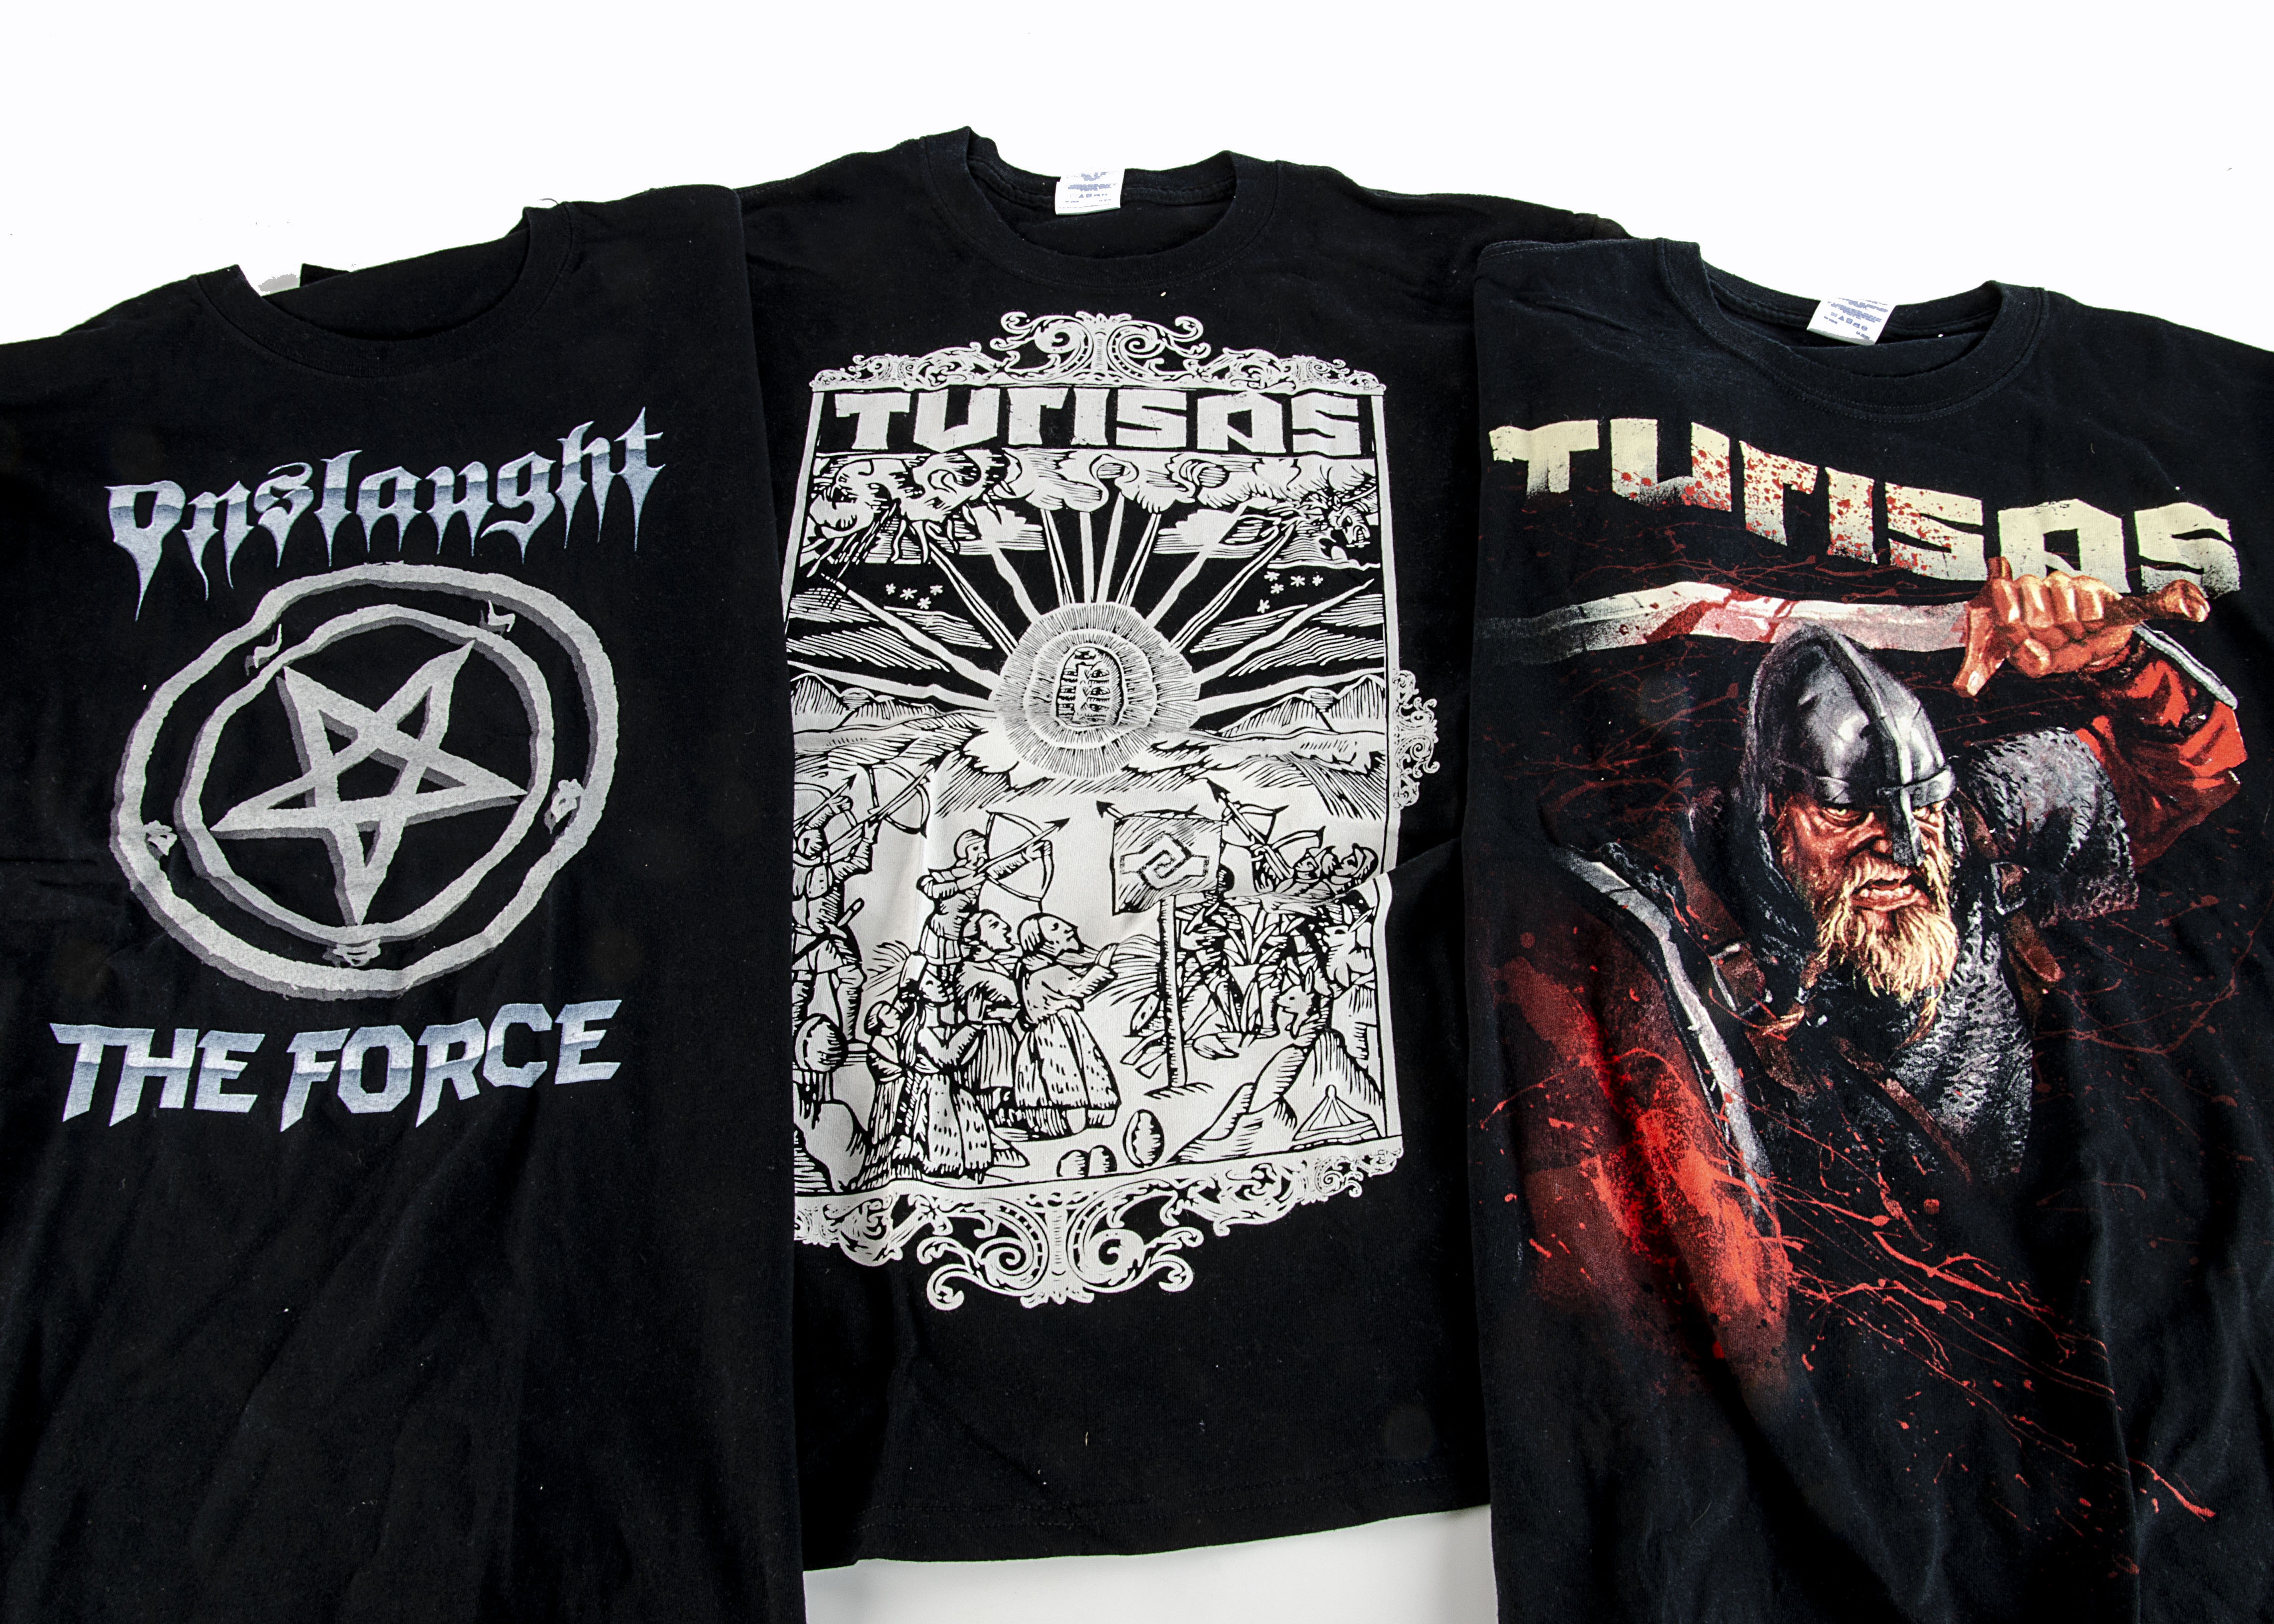 Death / Black Metal T-Shirts, fifteen 'T' Shirts printed with a variety of metal bands comprising